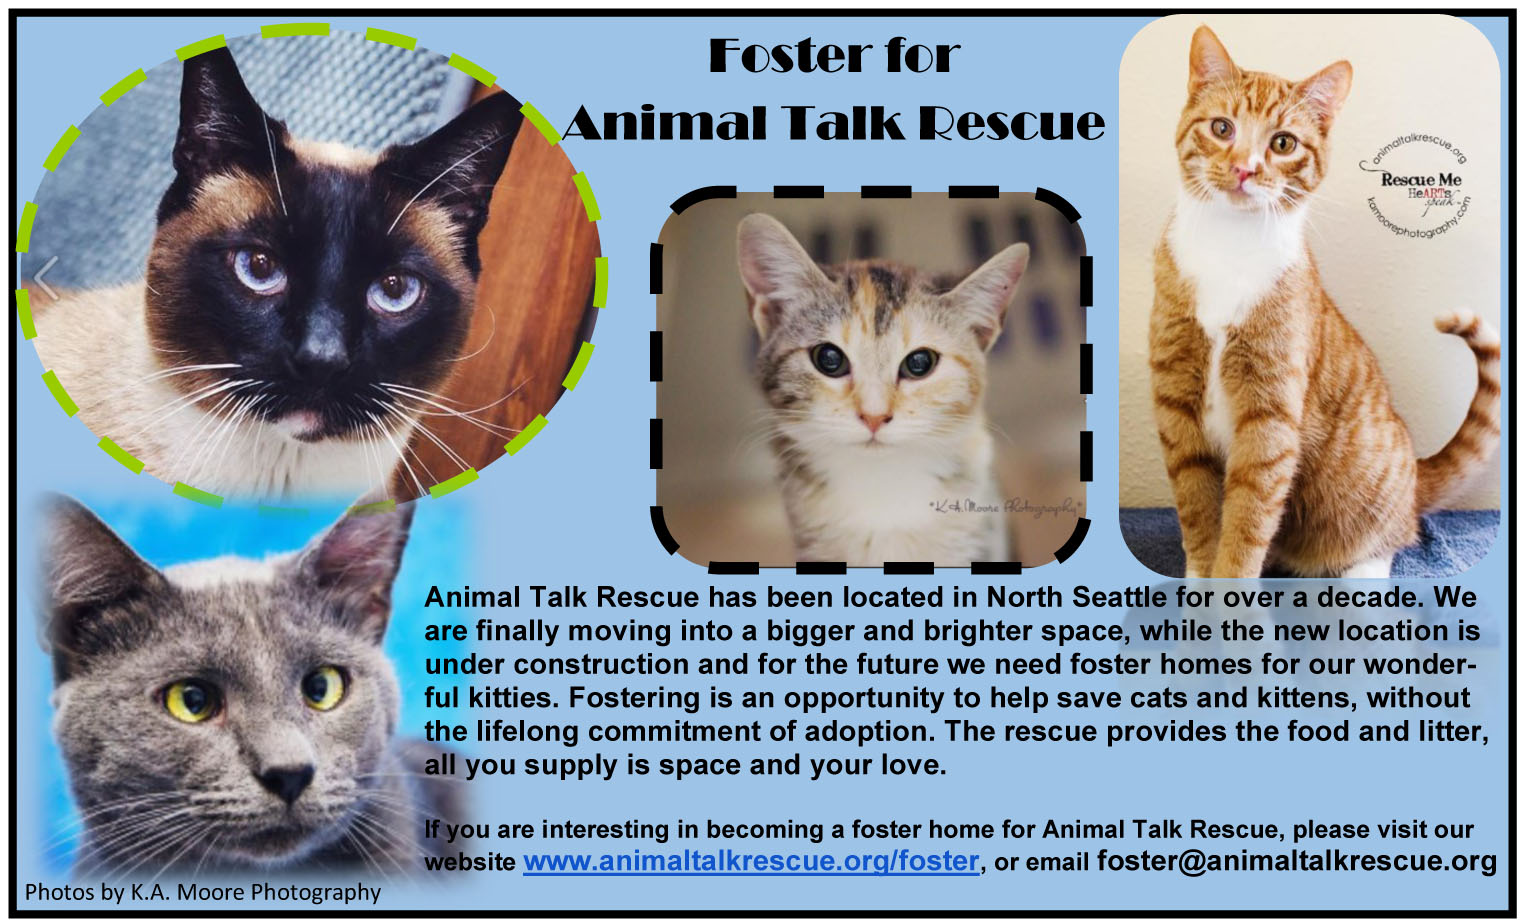 Can you help with finding foster homes for local Seattle cat rescue?